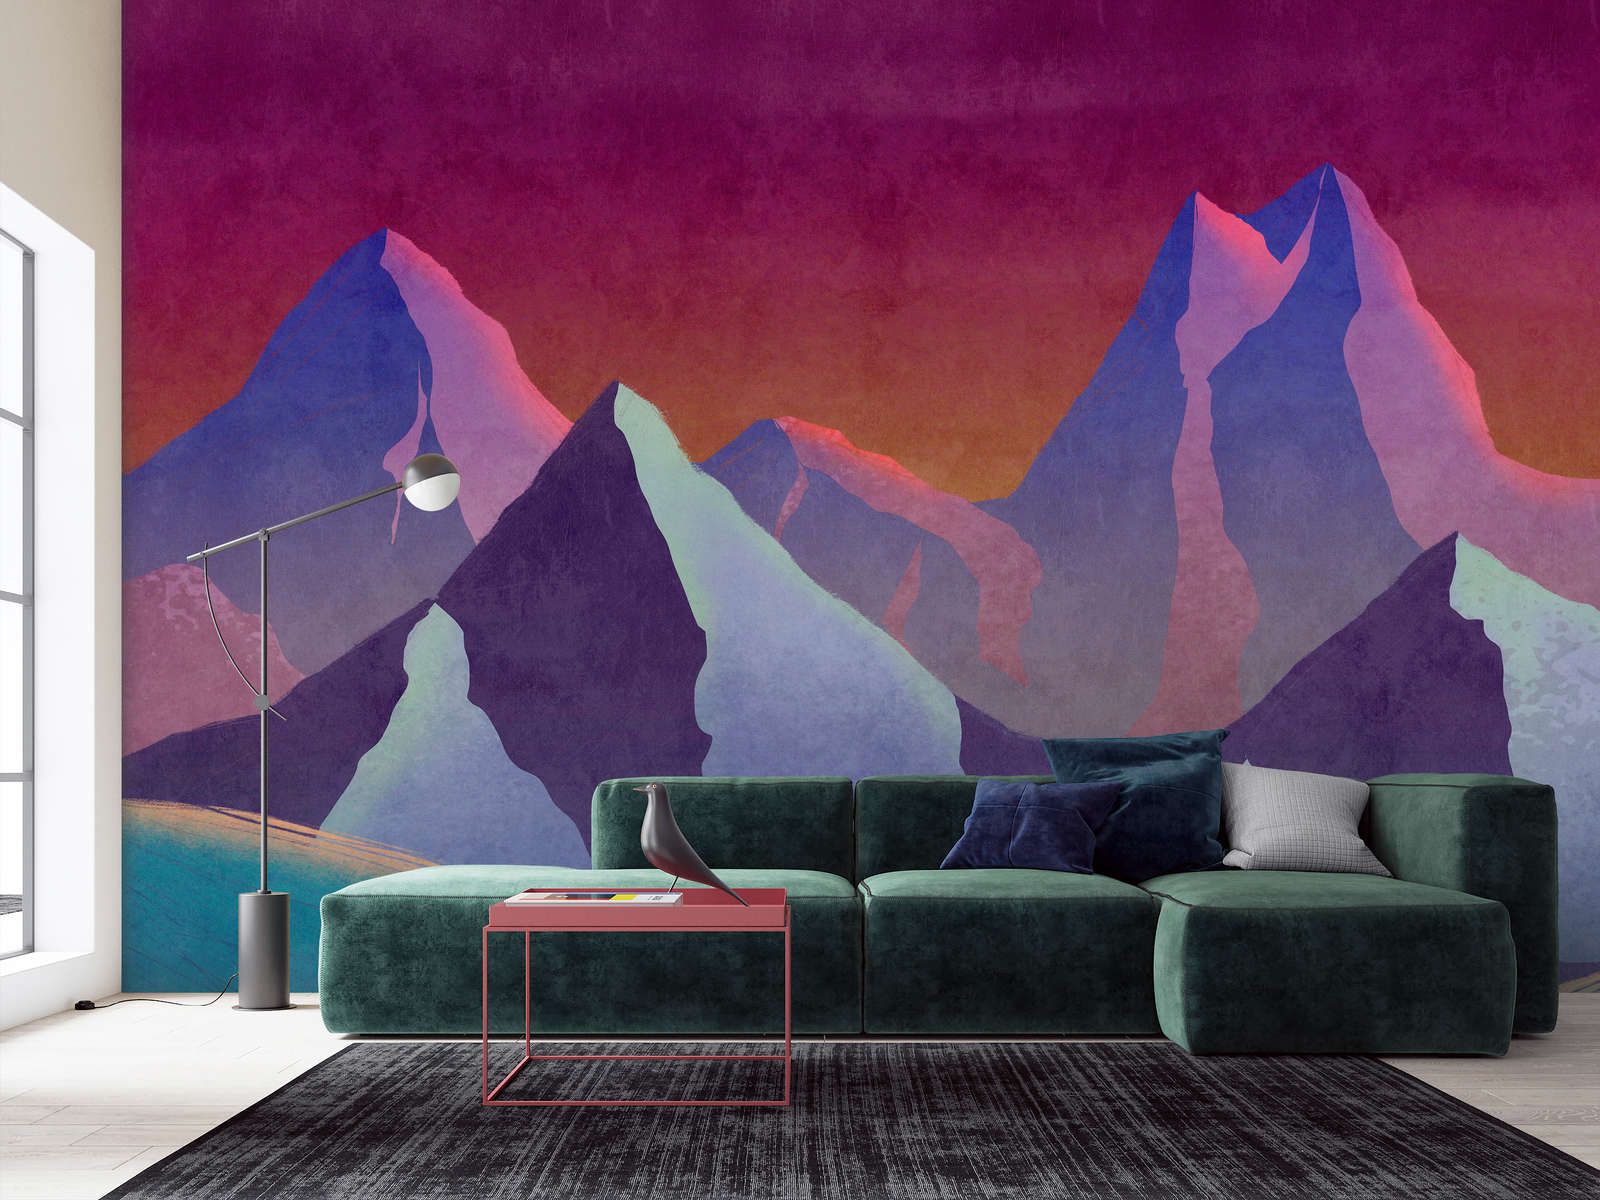             Photo wallpaper »altitude 1« - Abstract mountains in neon colours with vintage plaster texture - Smooth, slightly shiny premium non-woven fabric
        